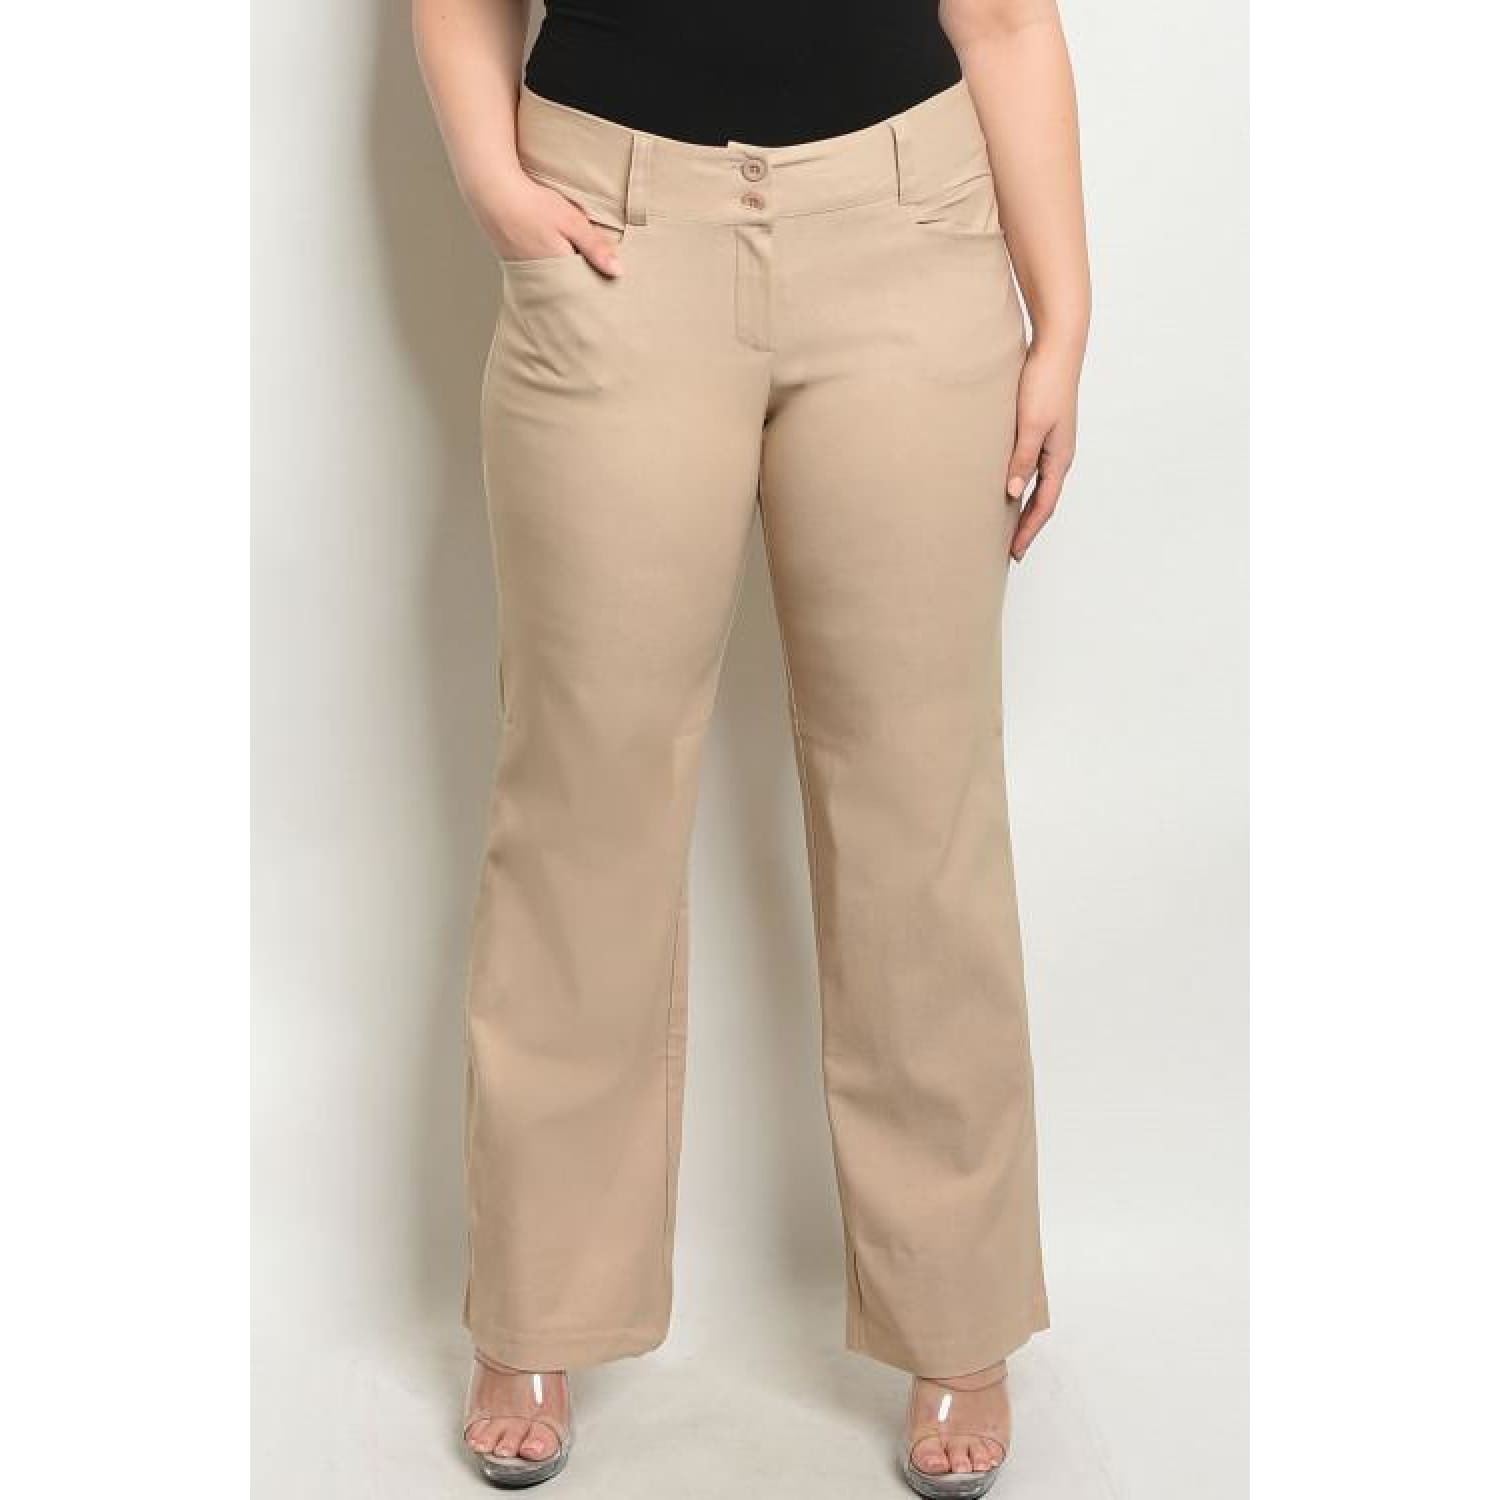 Tan Button Up Pants Plus - Best YOU by HTS